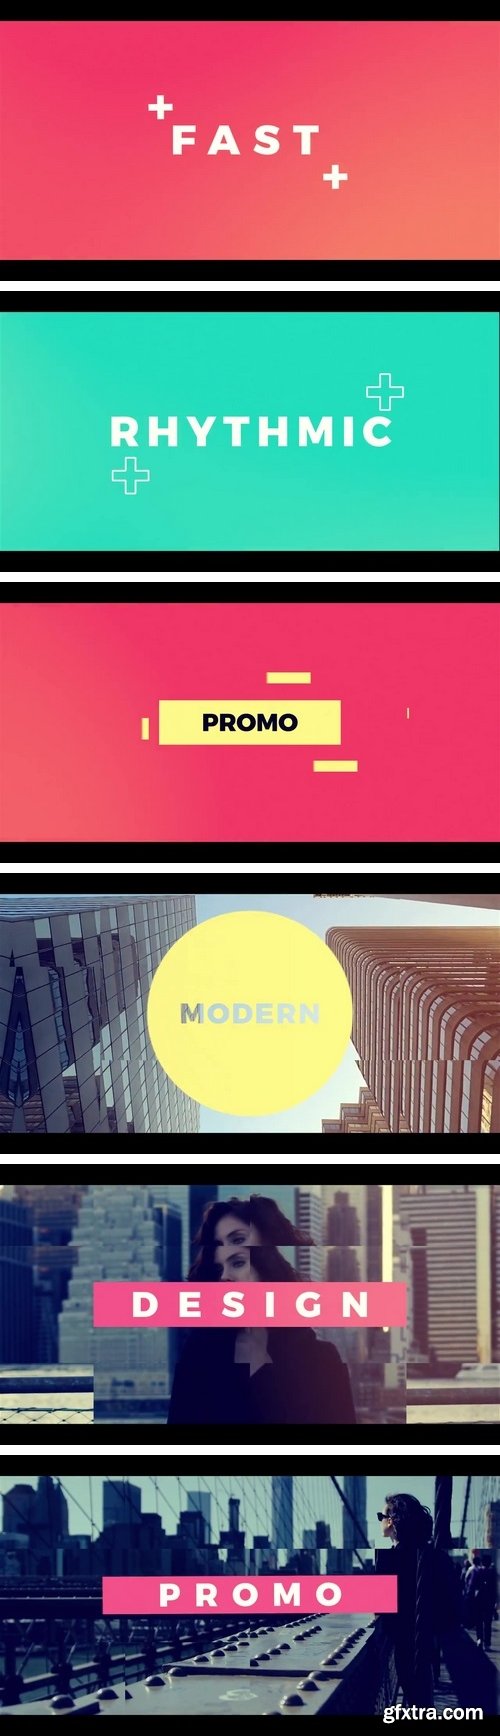 MotionArray - Fast Promo After Effects Templates 57651